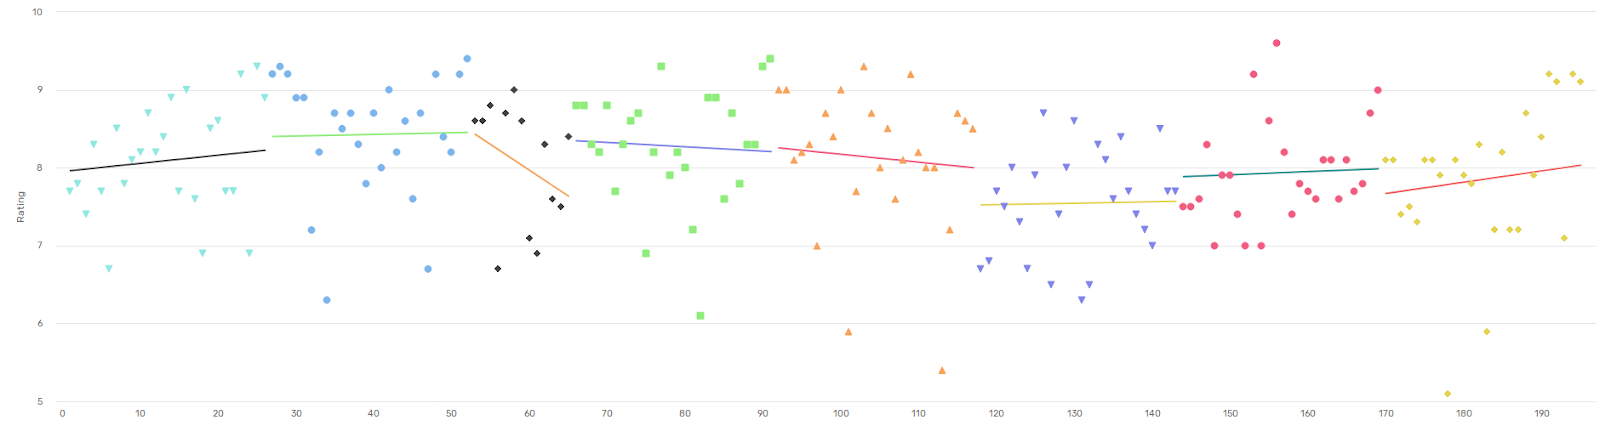 Best Episodes of Quanzhi Fashi (Interactive Rating Graph)